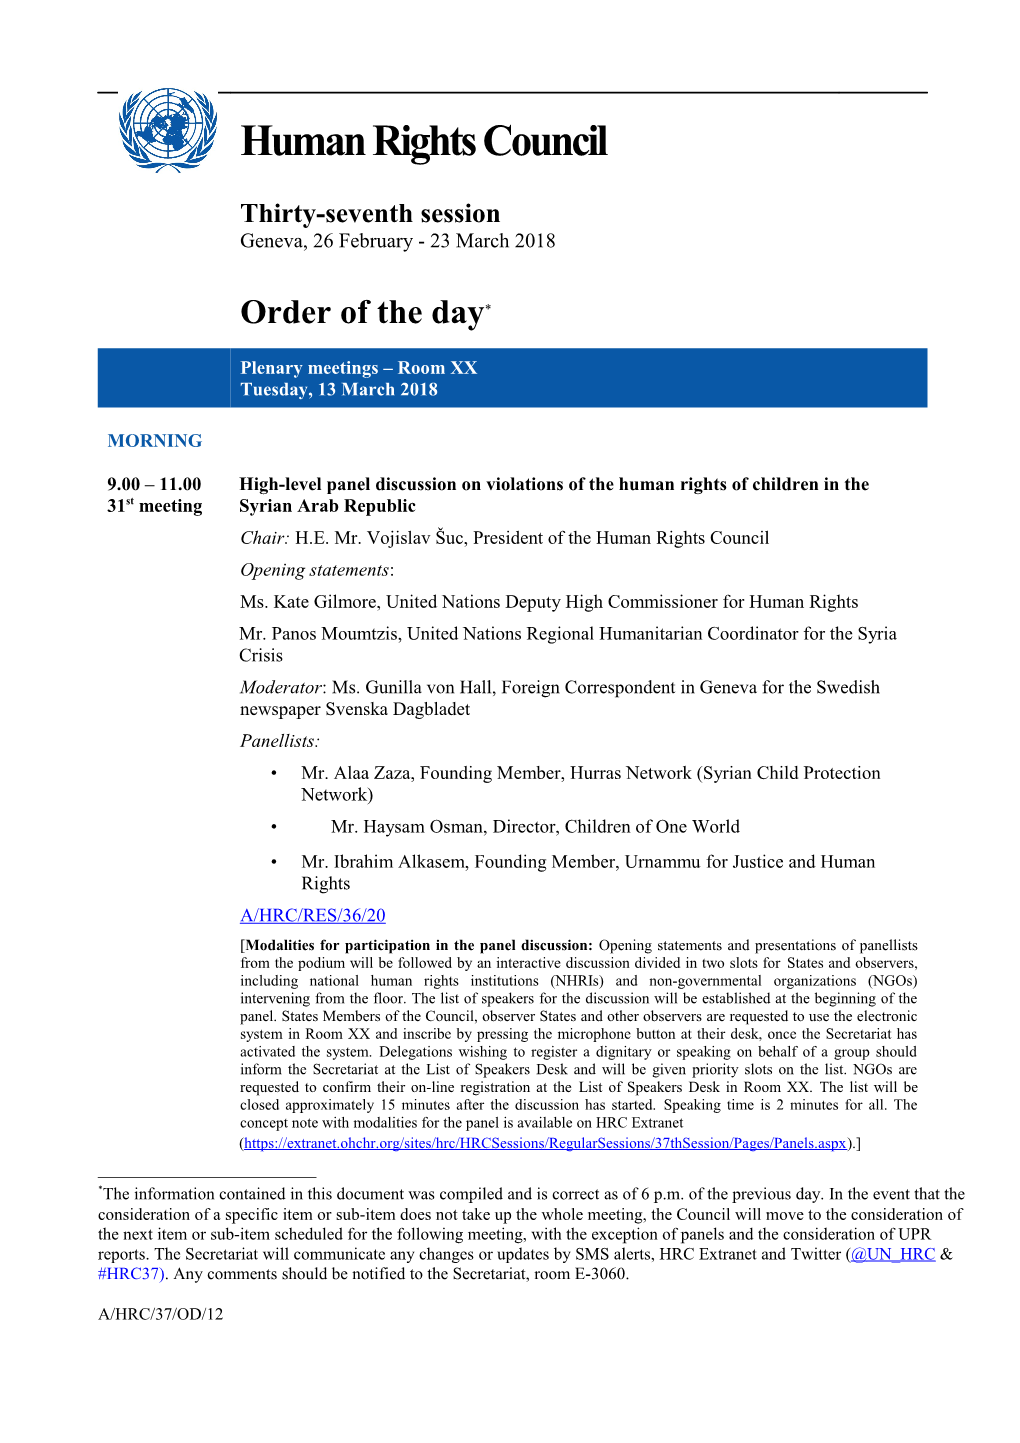 Order of the Day, Tuesday 13 March 2018